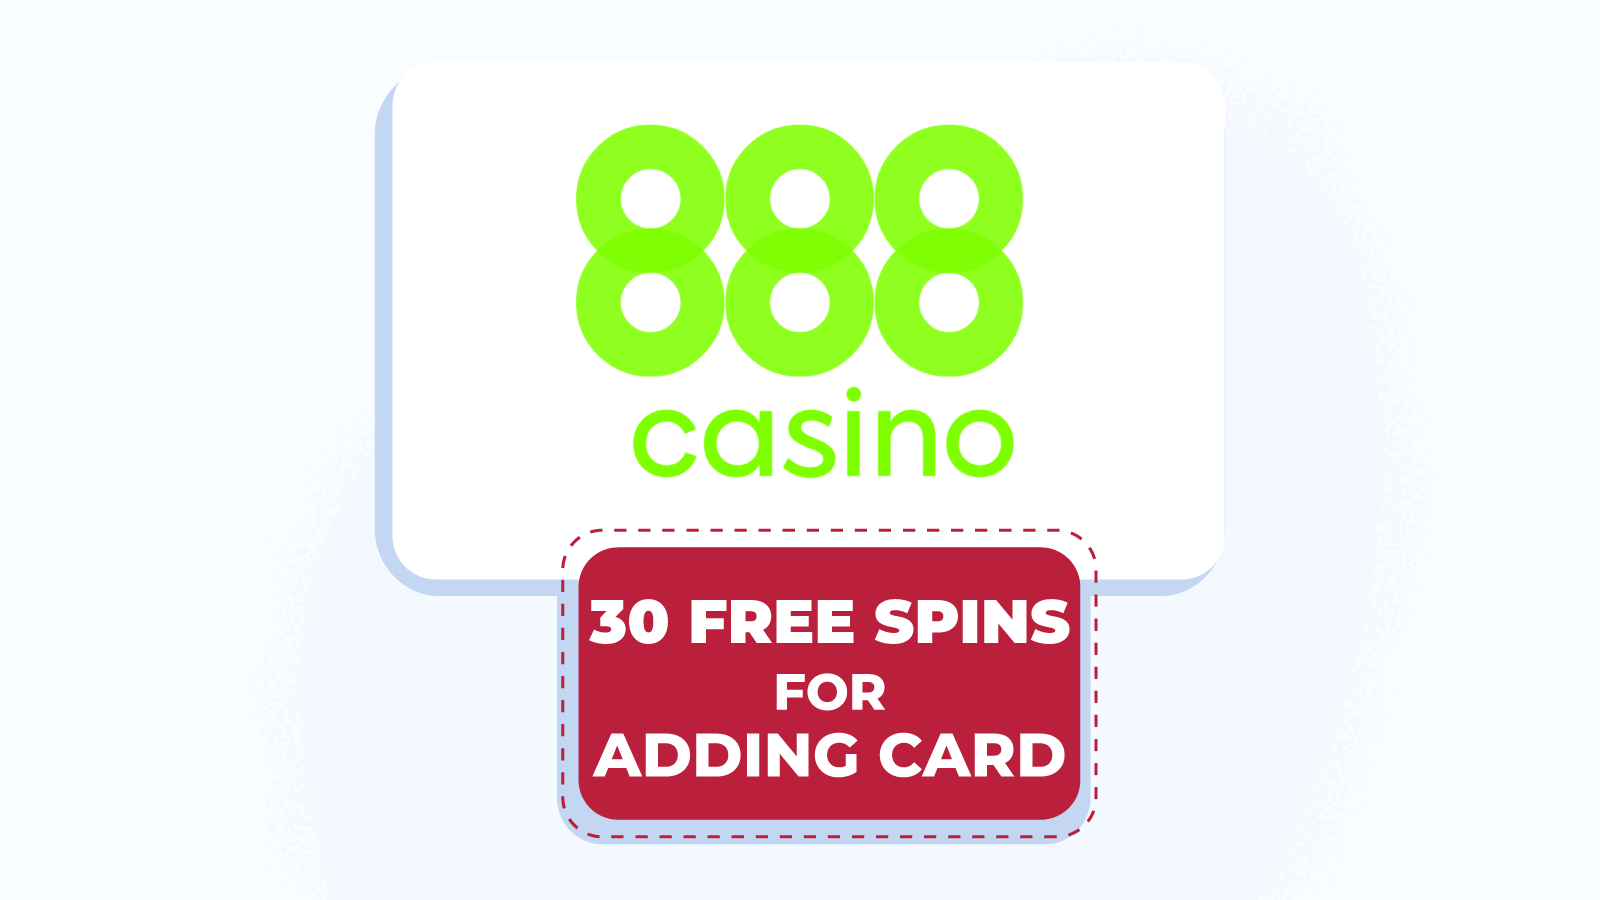 30 free spins for adding card at 888casino